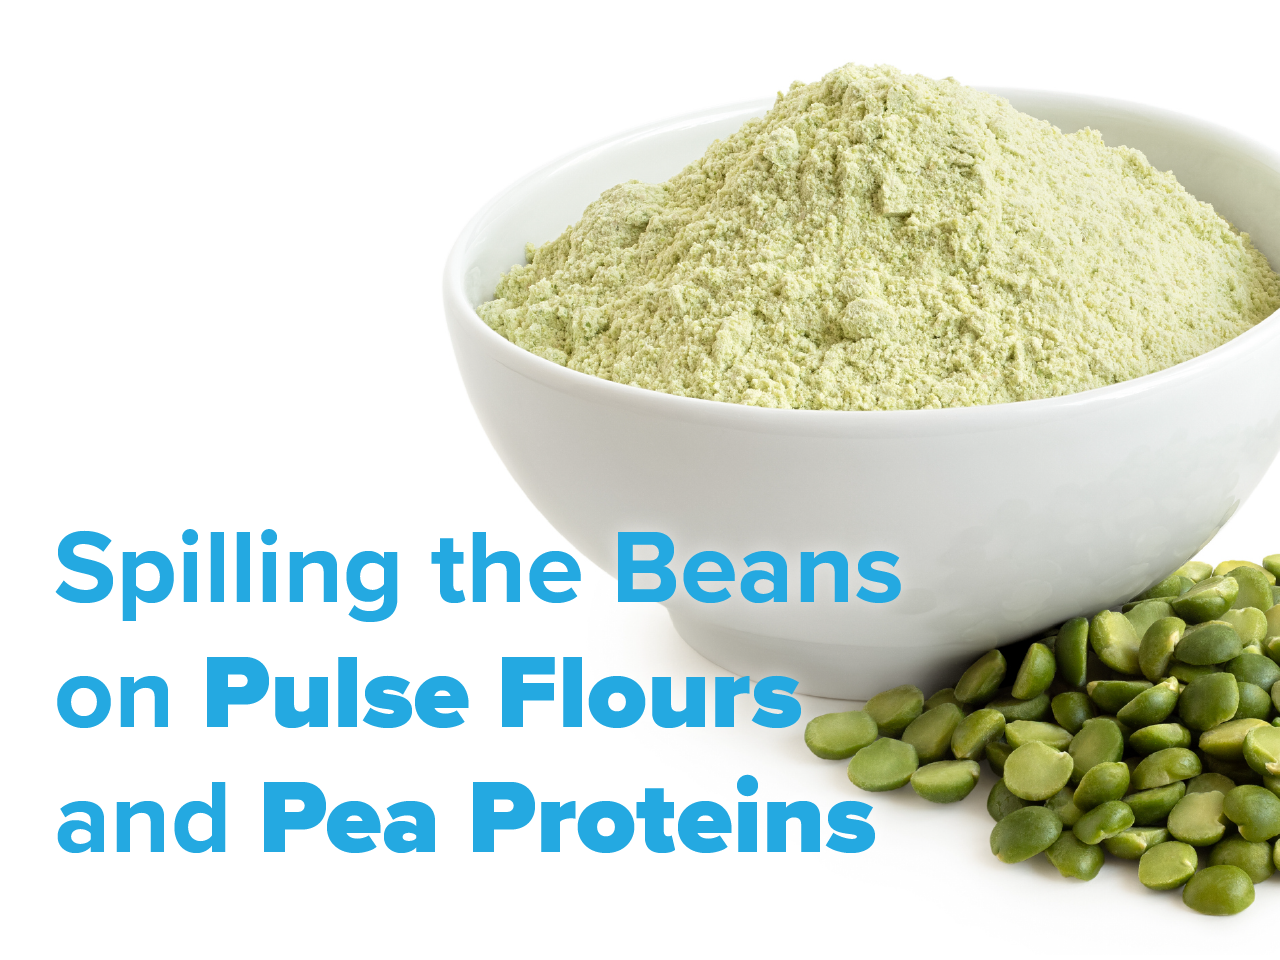 Spilling the Beans on Pulse Flours and Pea Proteins